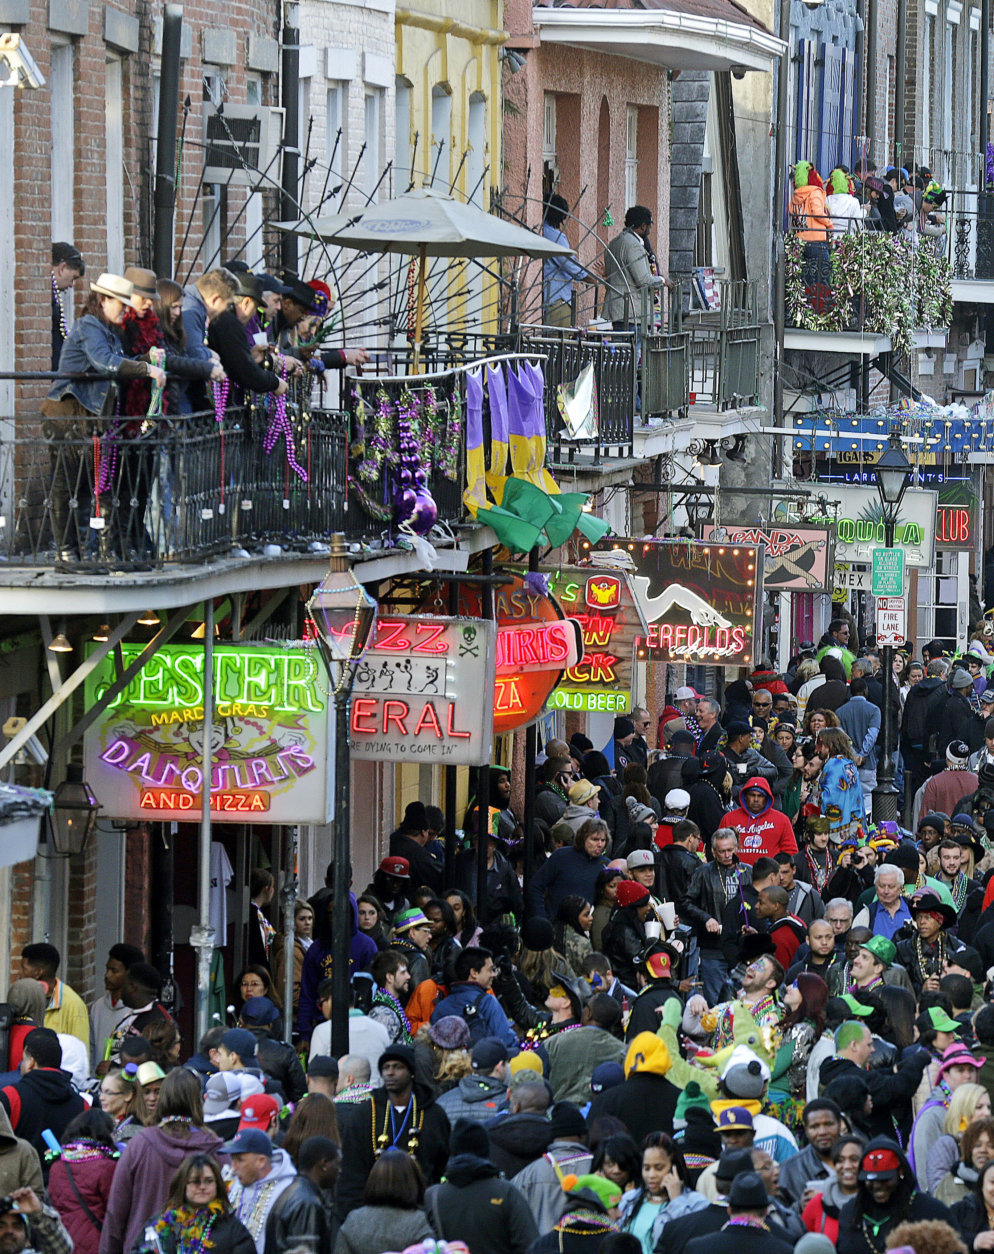 FILE - In this Feb. 17, 2015 file photo, revelers pack Bourbon Street on Mardi Gras day in the French Quarter in New Orleans. Mardi Gras falls on Feb. 17, 2016, the day before is Presidents Day and the Saturday before is Valentine's Day. (AP Photo/Gerald Herbert, File)